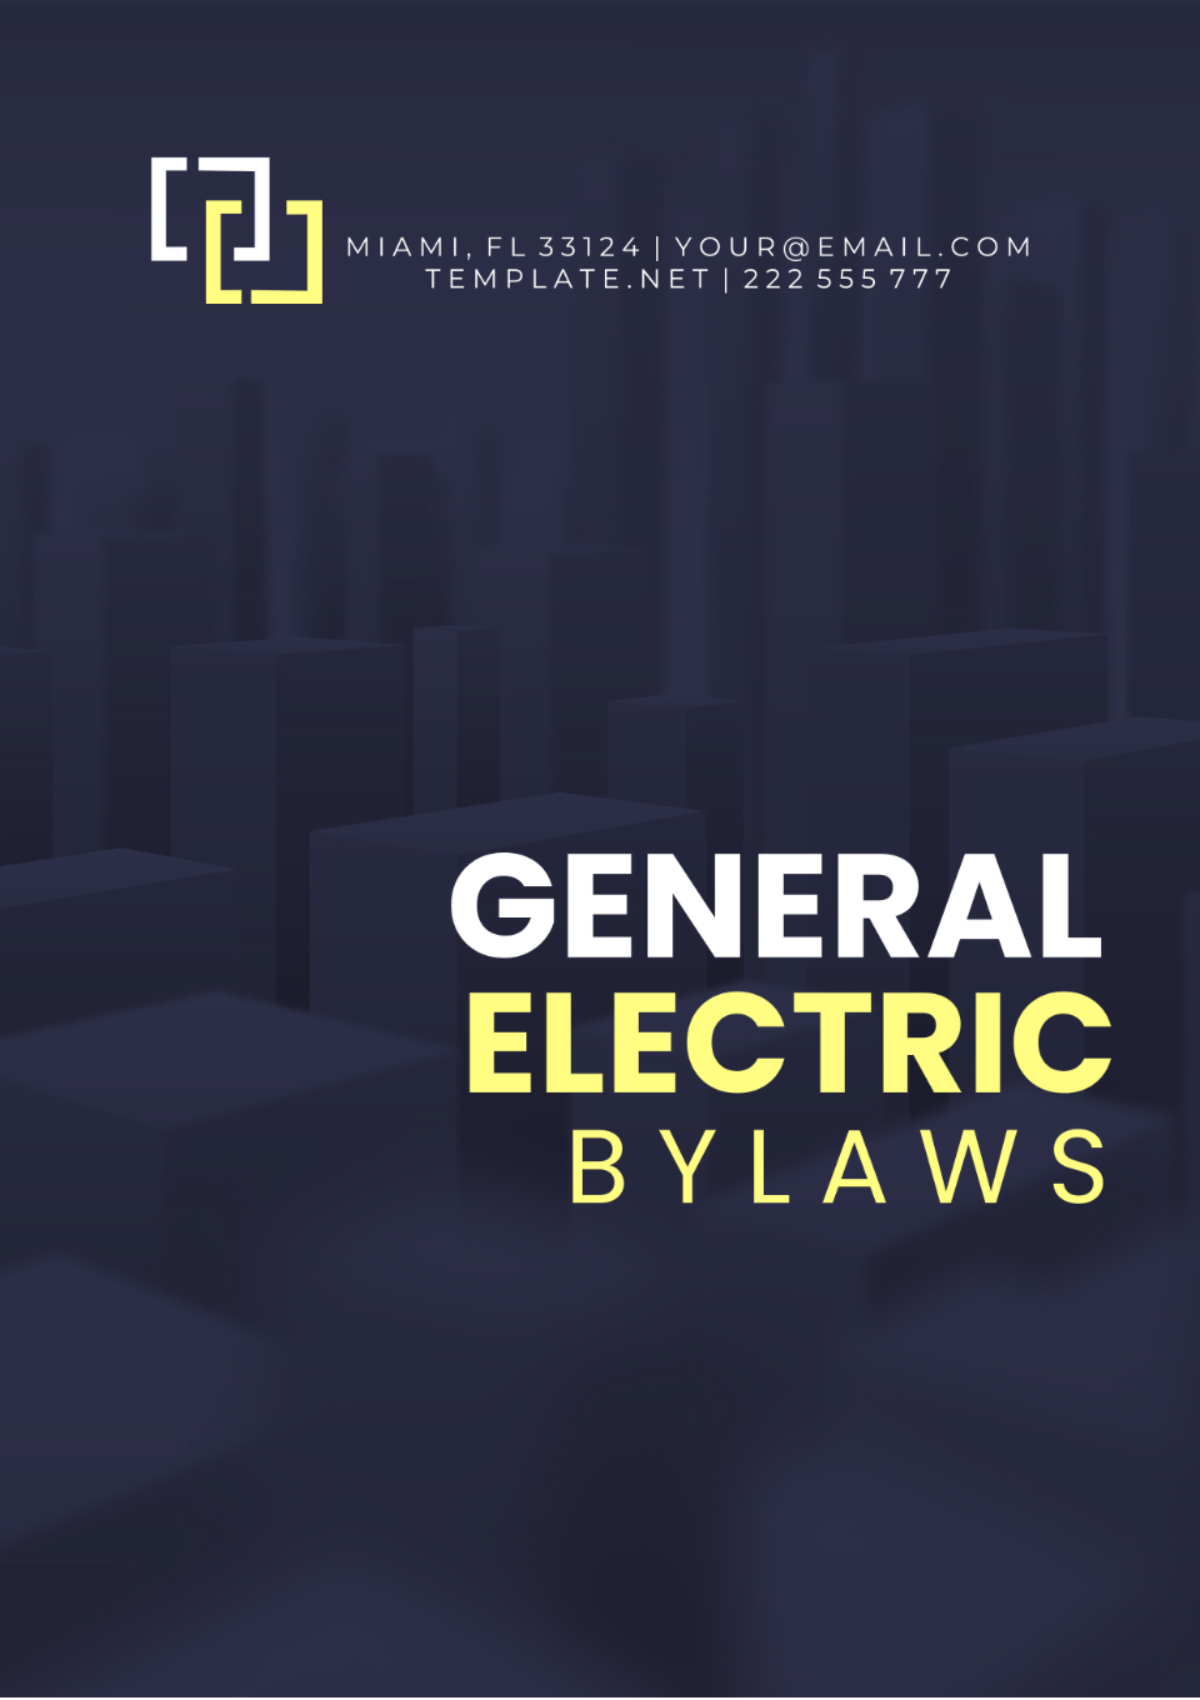 General Electric Bylaws Template